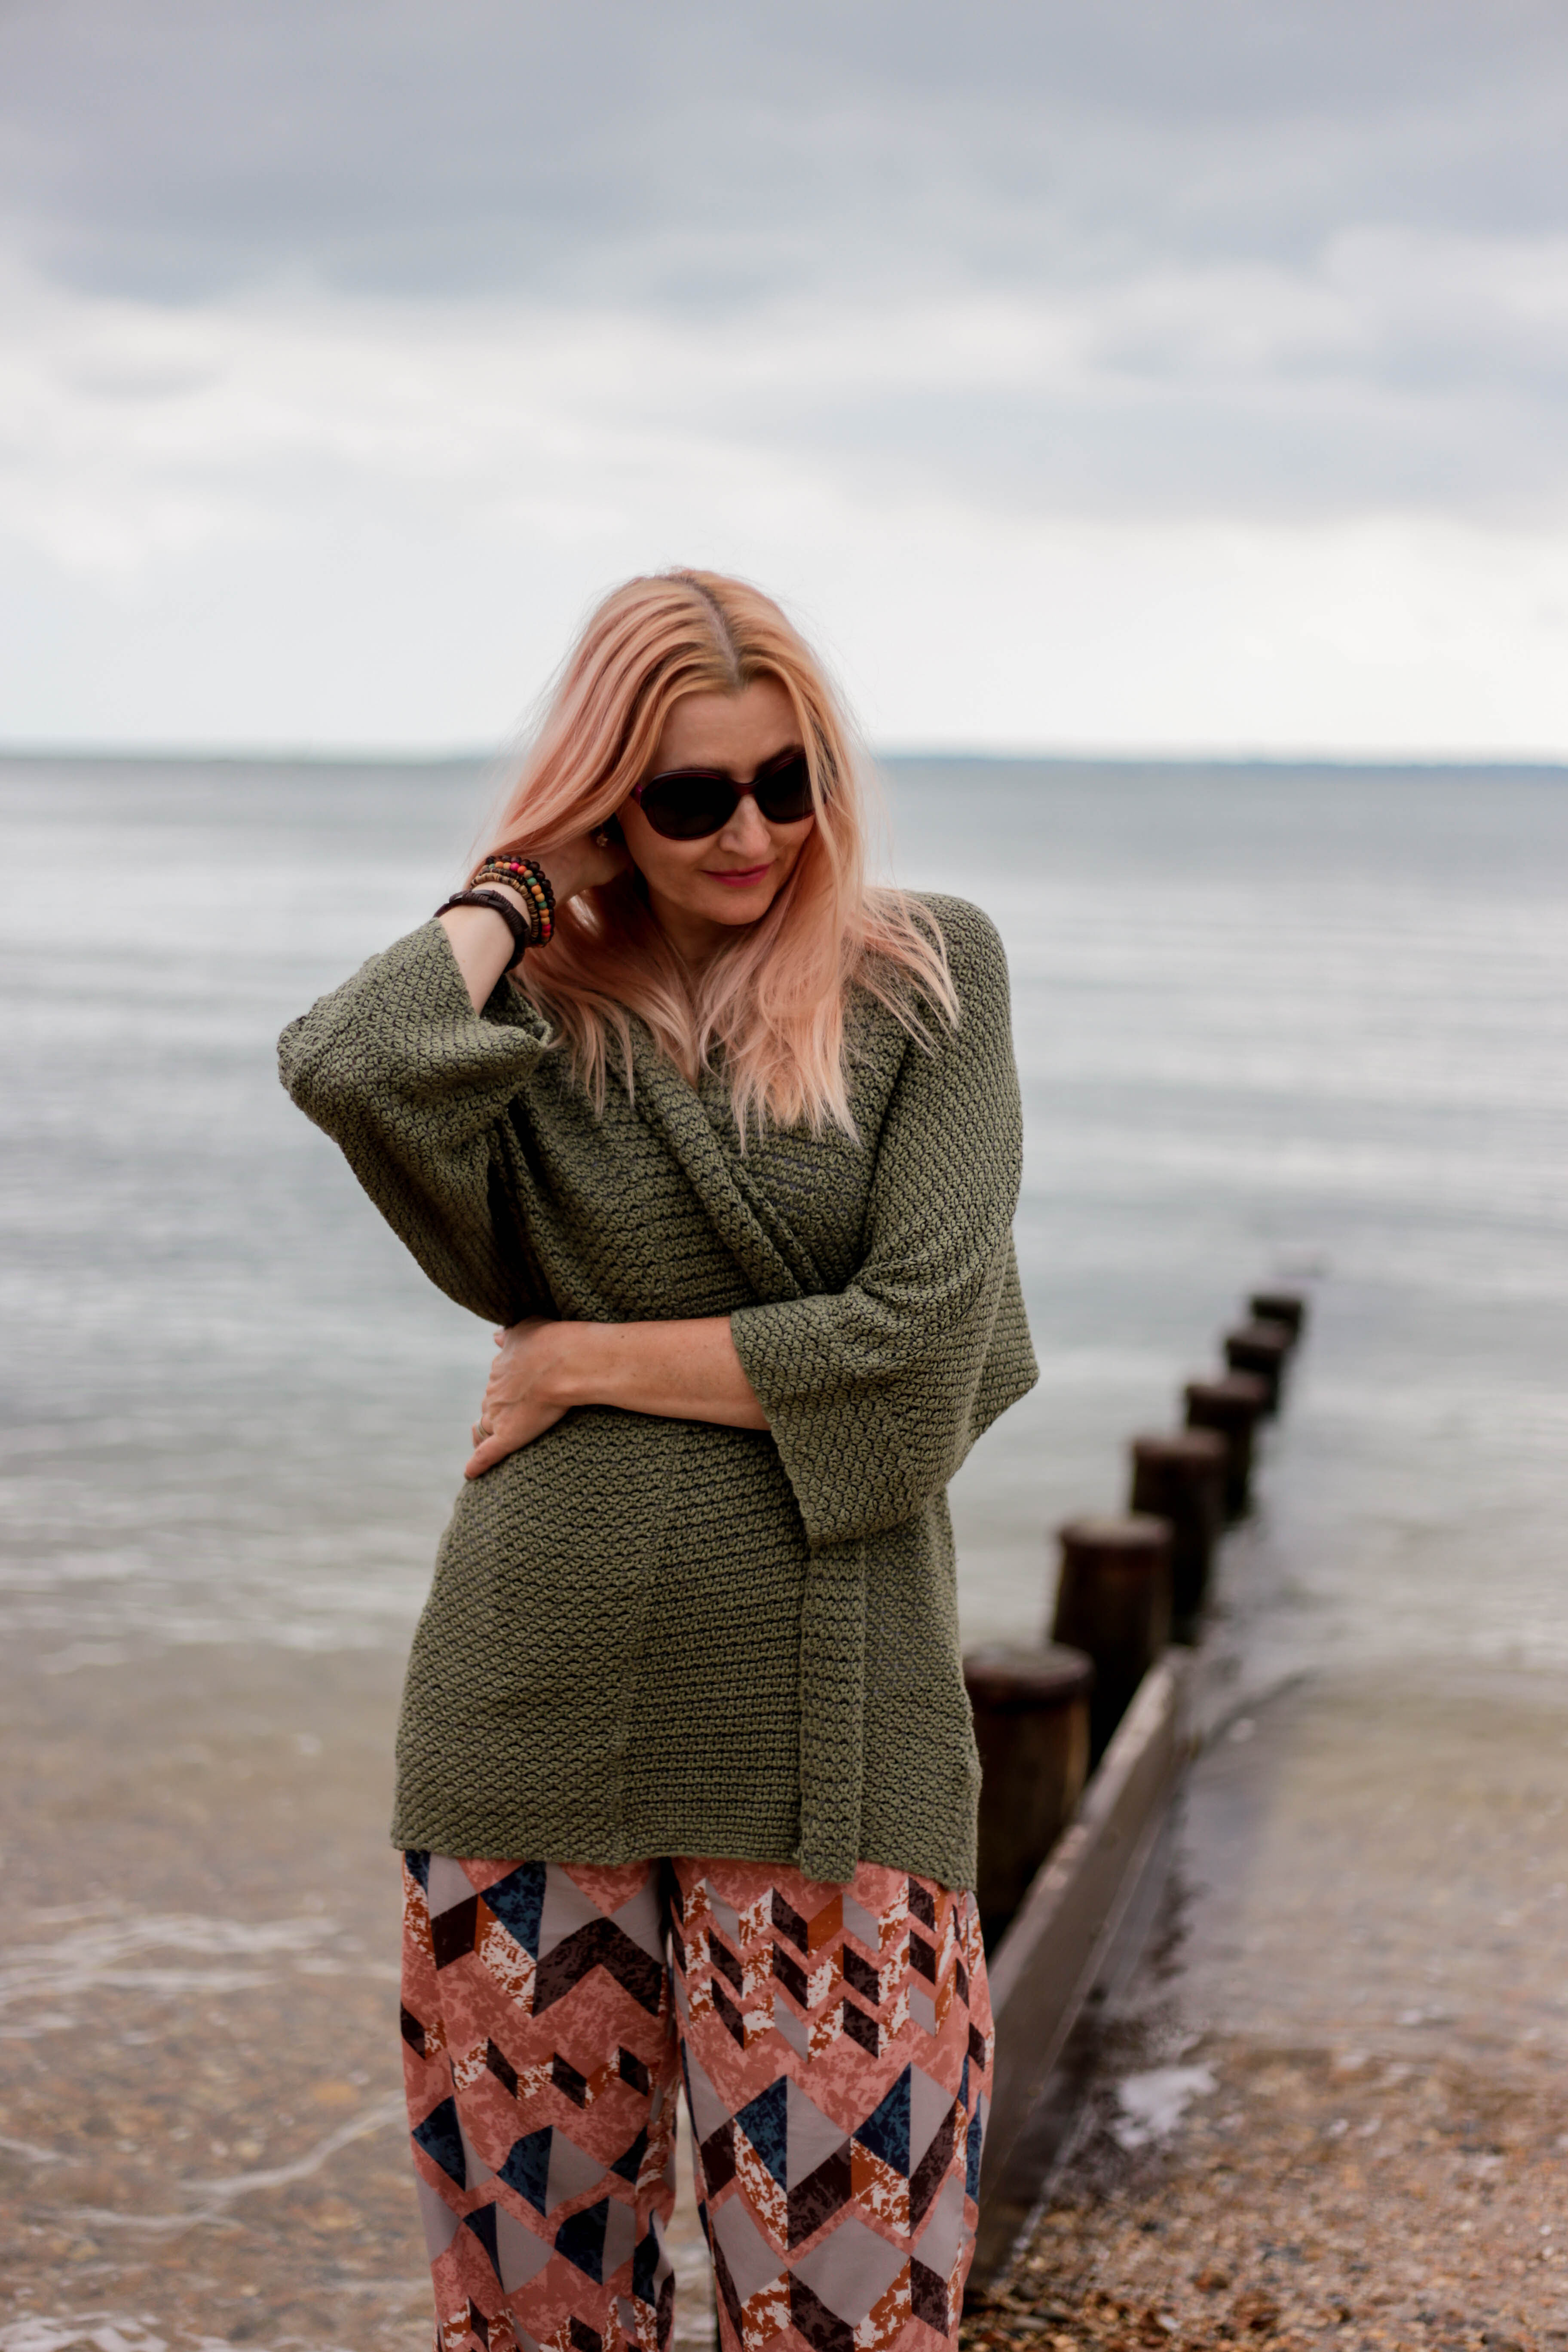 Moody Beach Shots With Slouchy, Autumnal Styling | Catherine Summers AKA Not Dressed As Lamb, Over 40 Fashion and Style